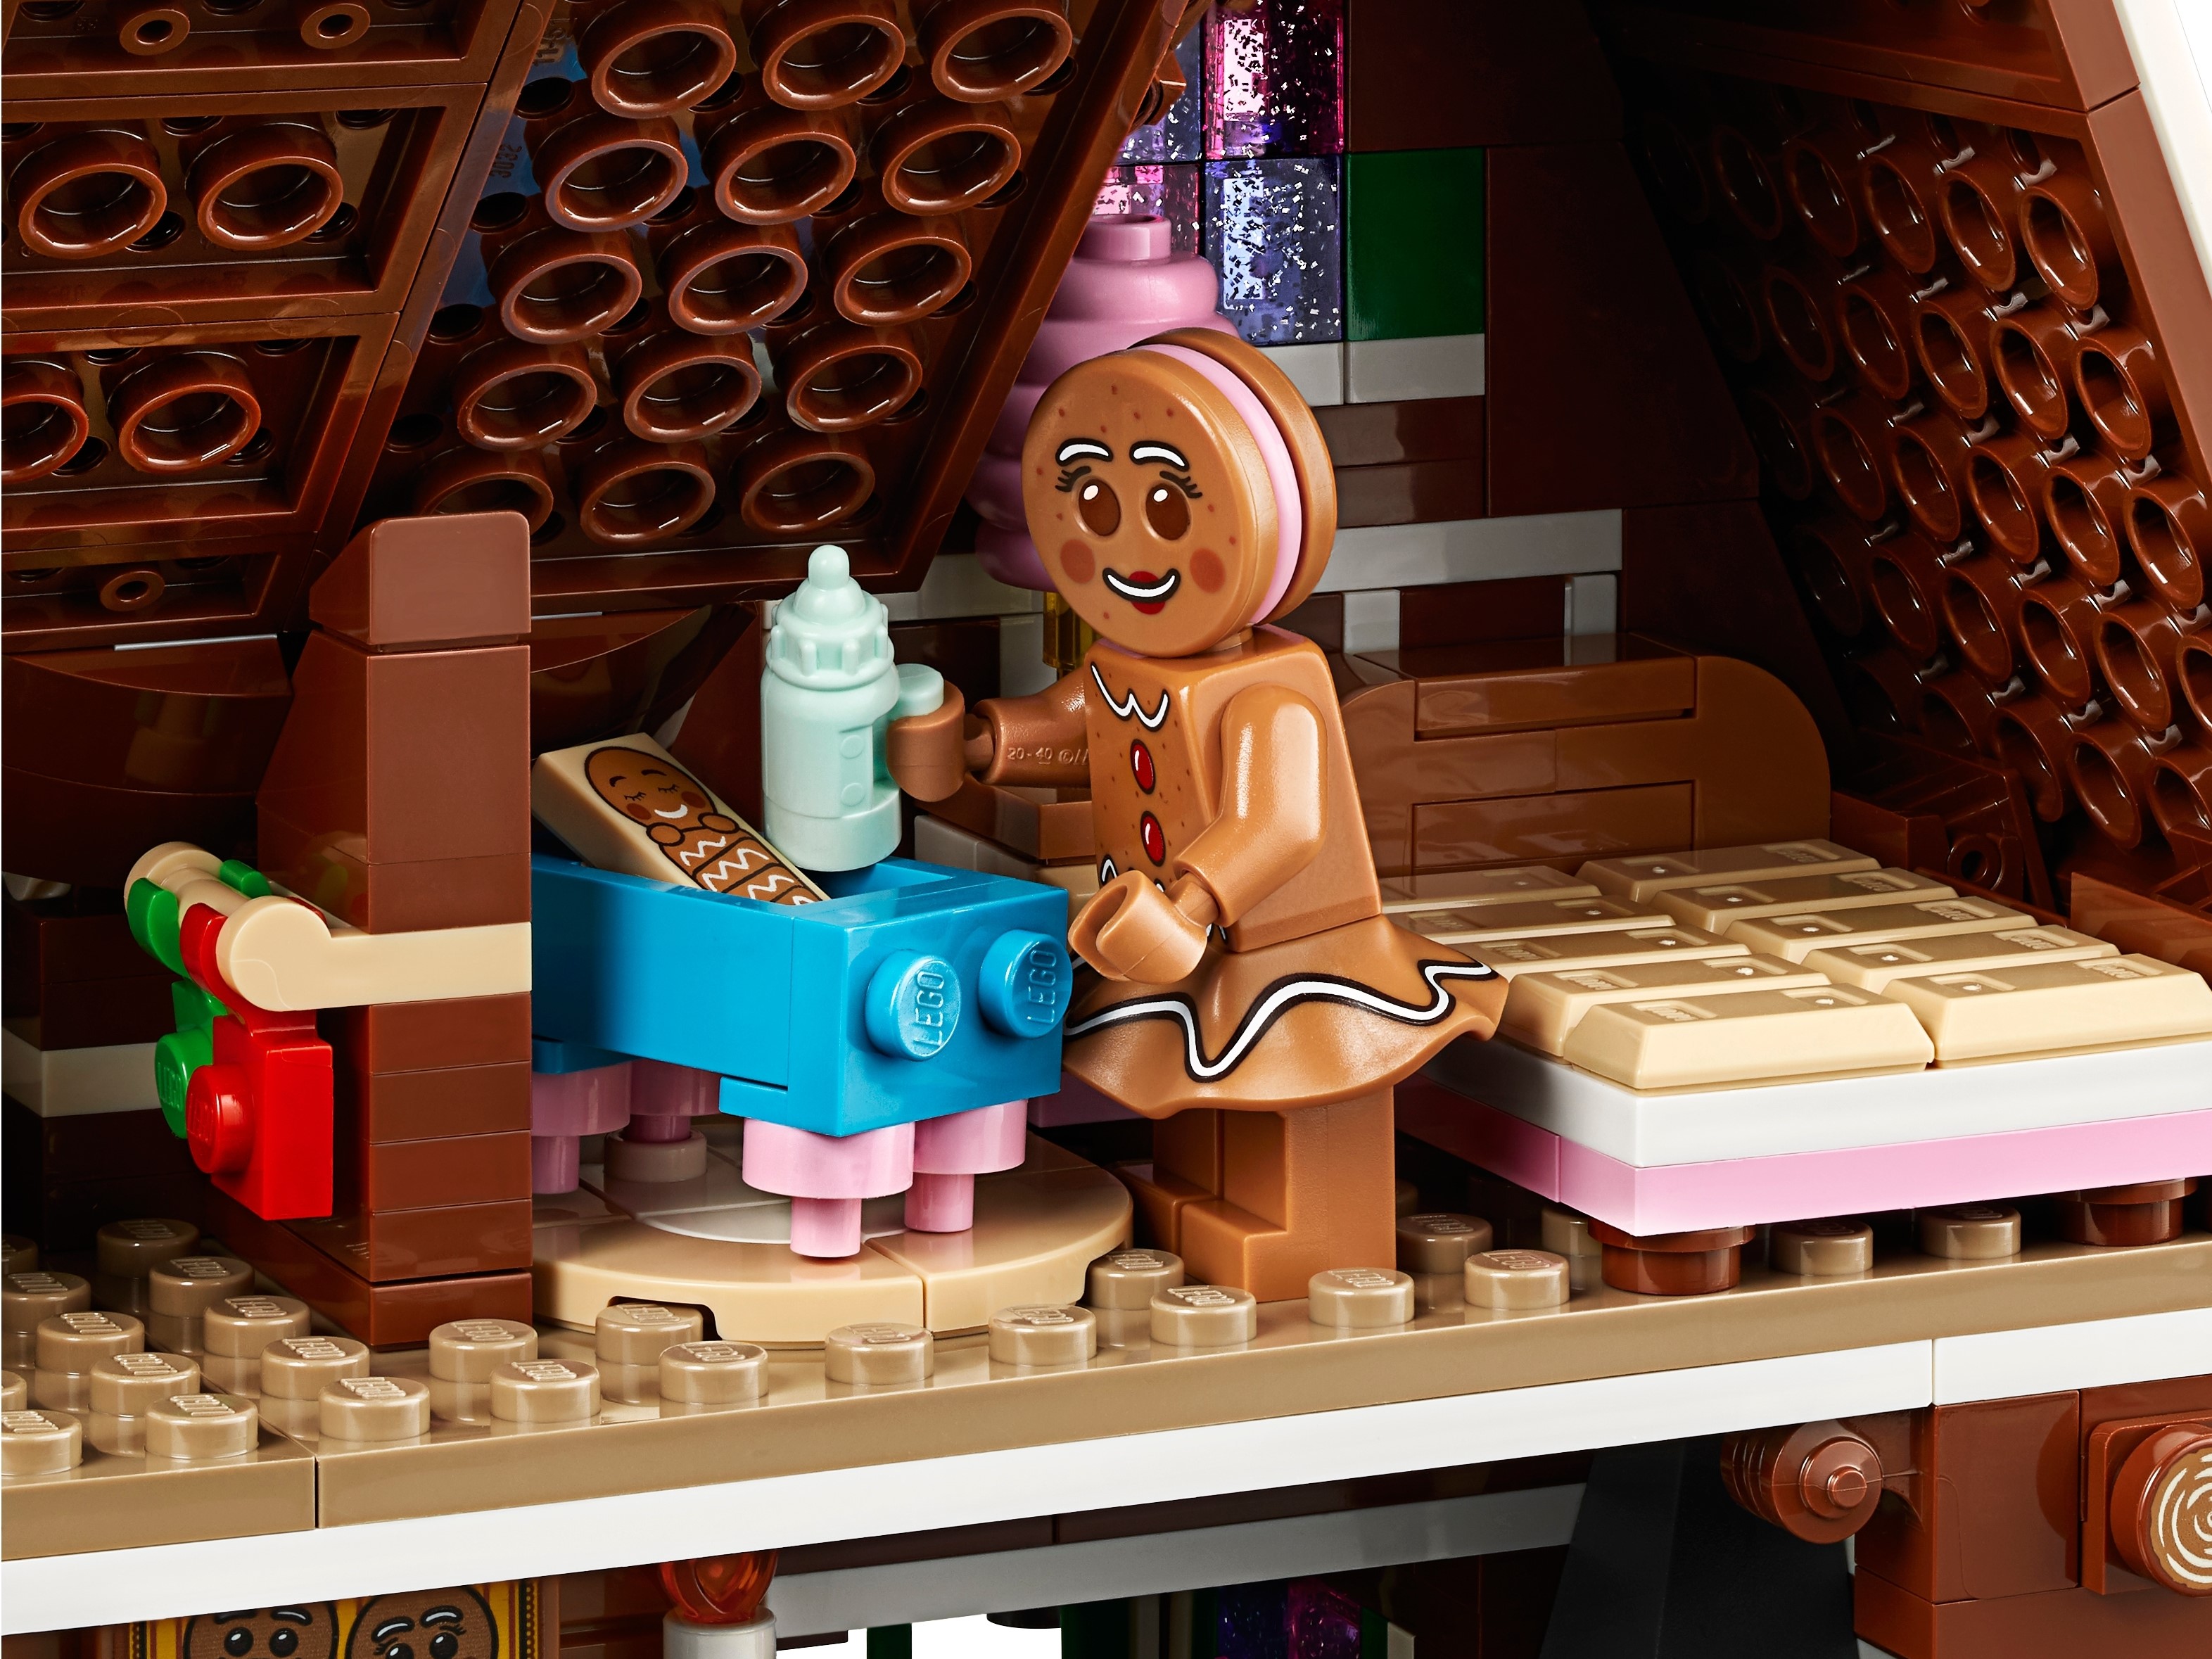 Gingerbread House 10267 Creator Buy online the Official LEGO® Shop US